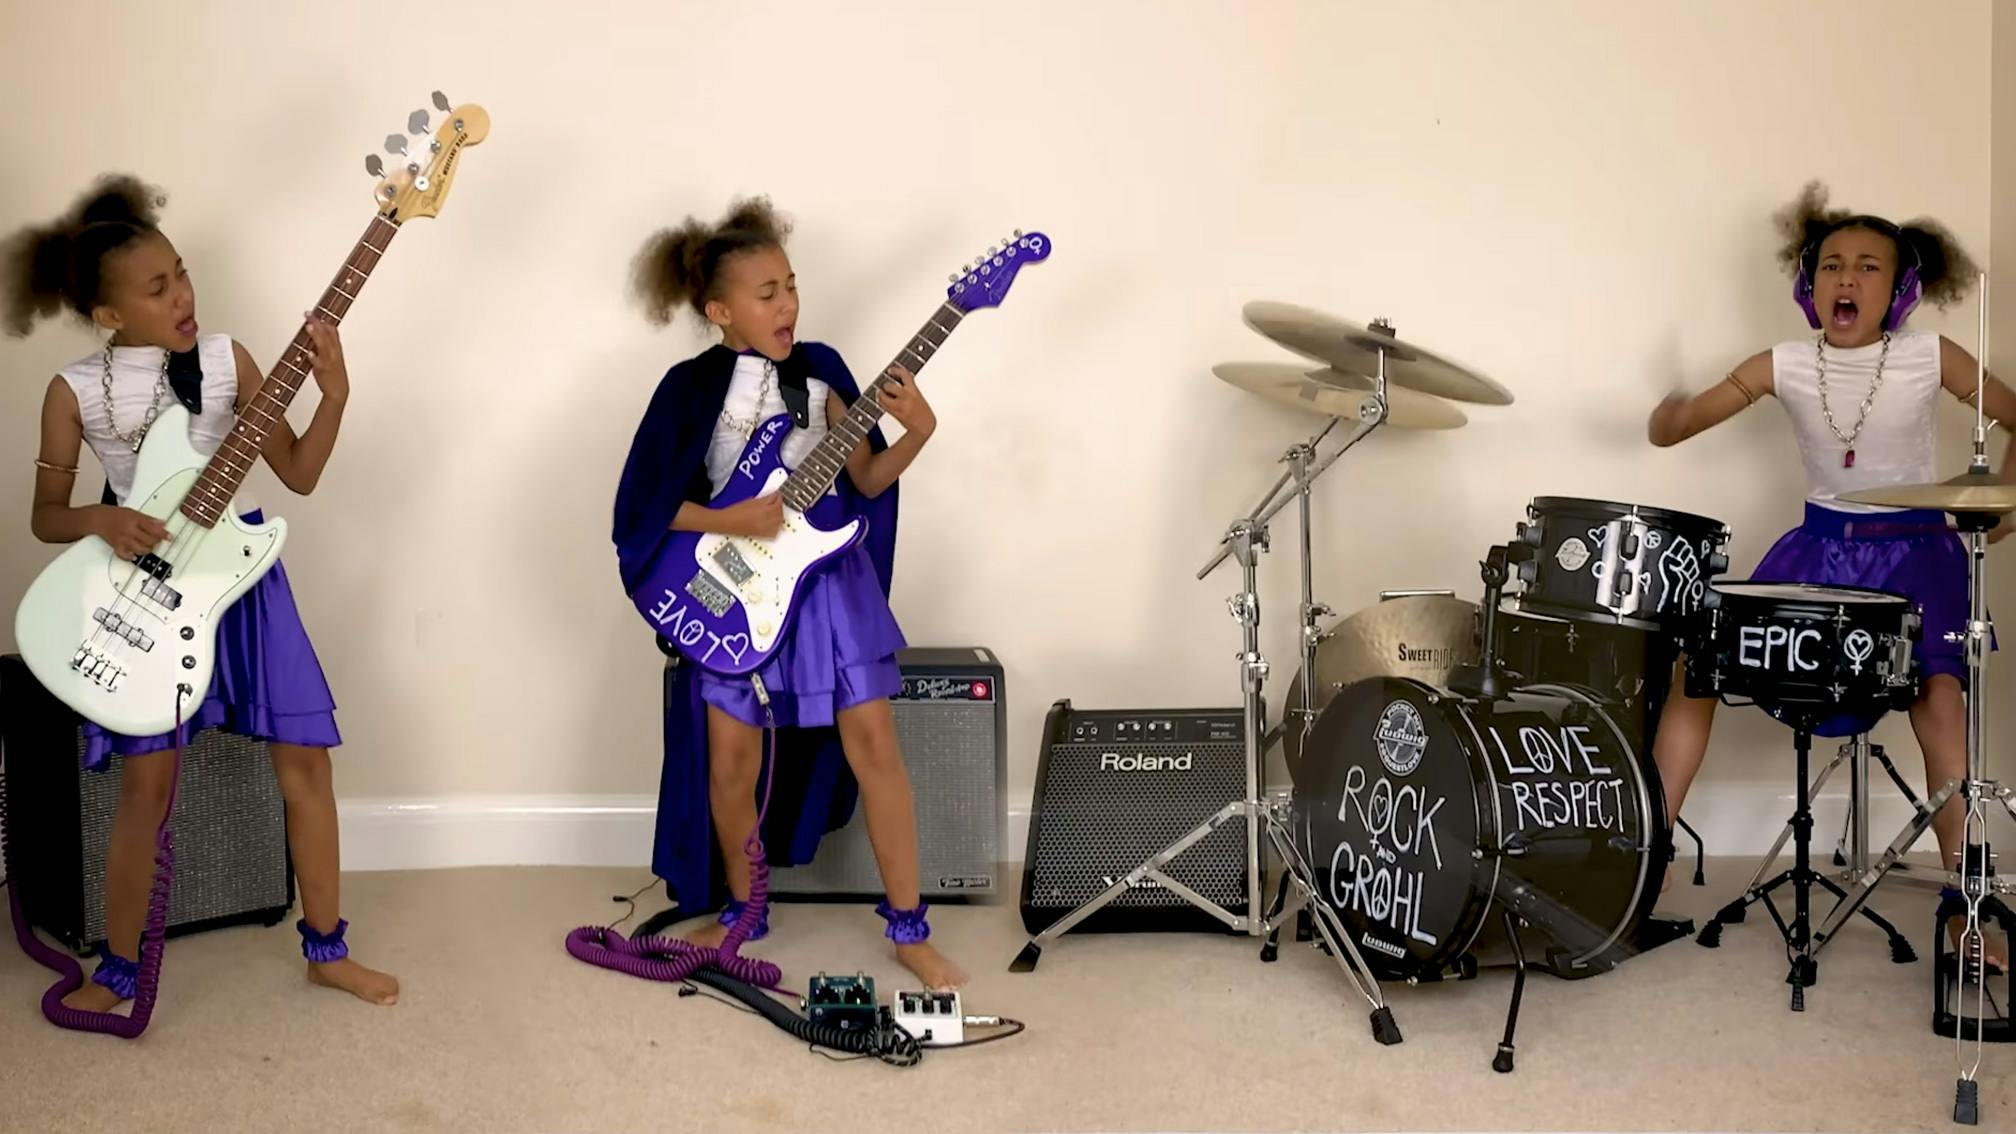 Nandi Bushell Performs Rock And Grohl, A New Theme Song For The Foo Fighters Frontman